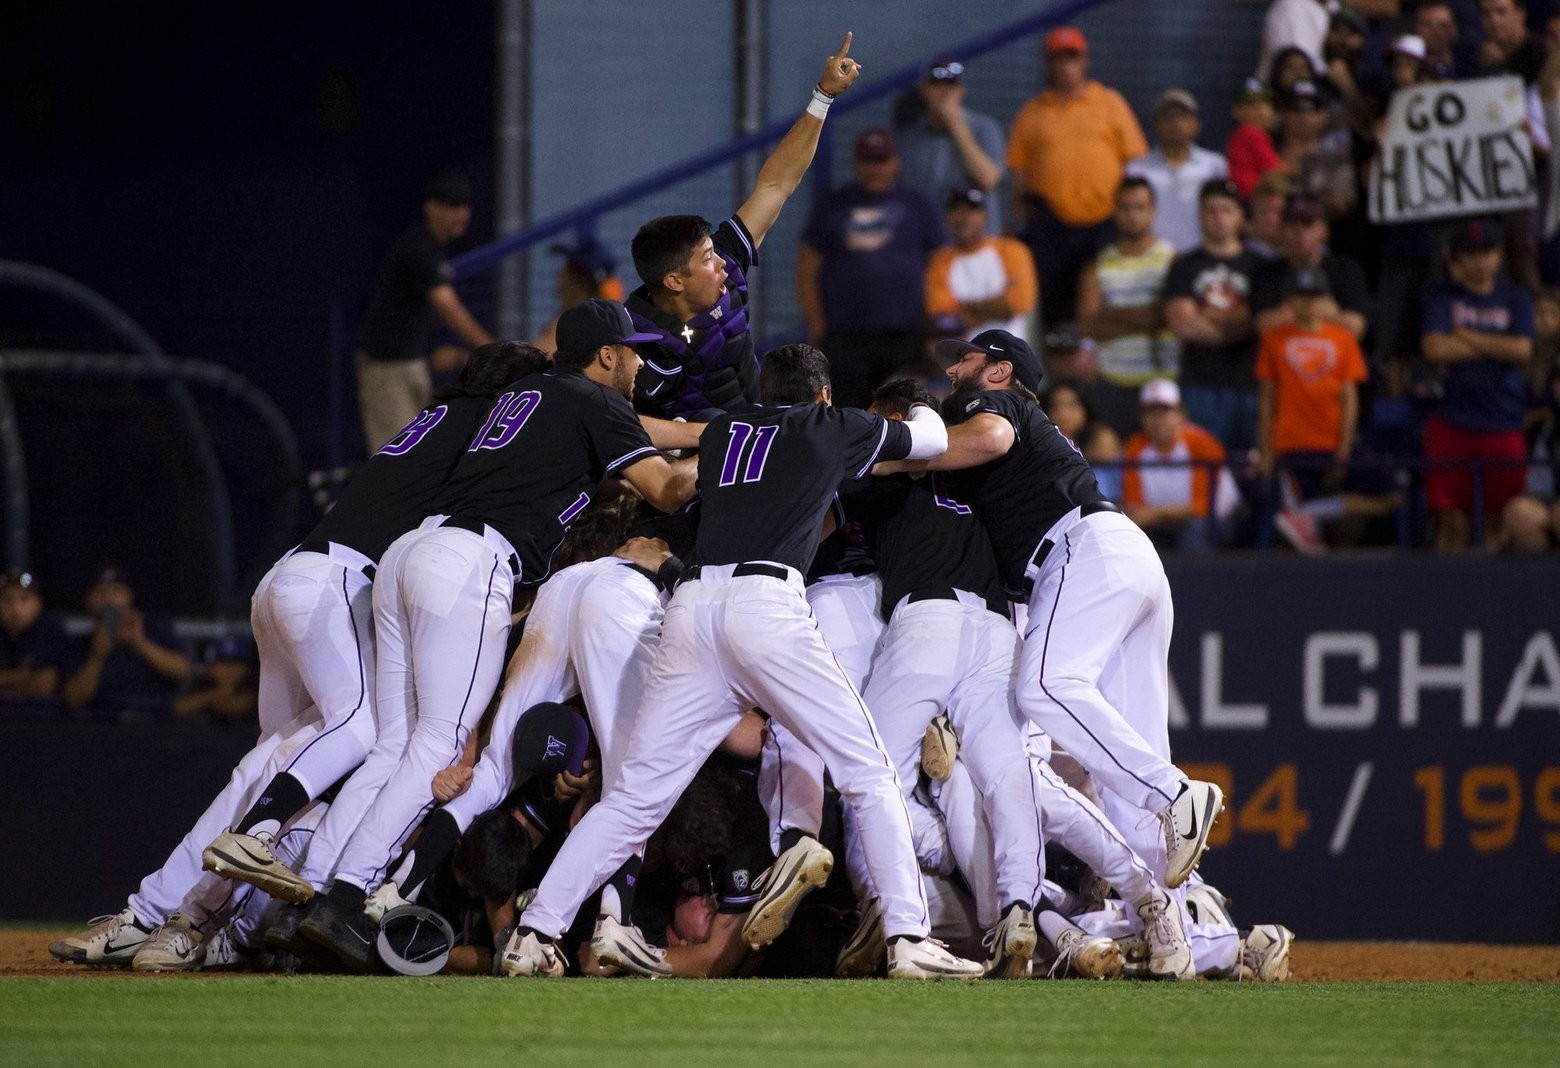 Tales from the bottom of the dogpile How the Huskies celebrated their